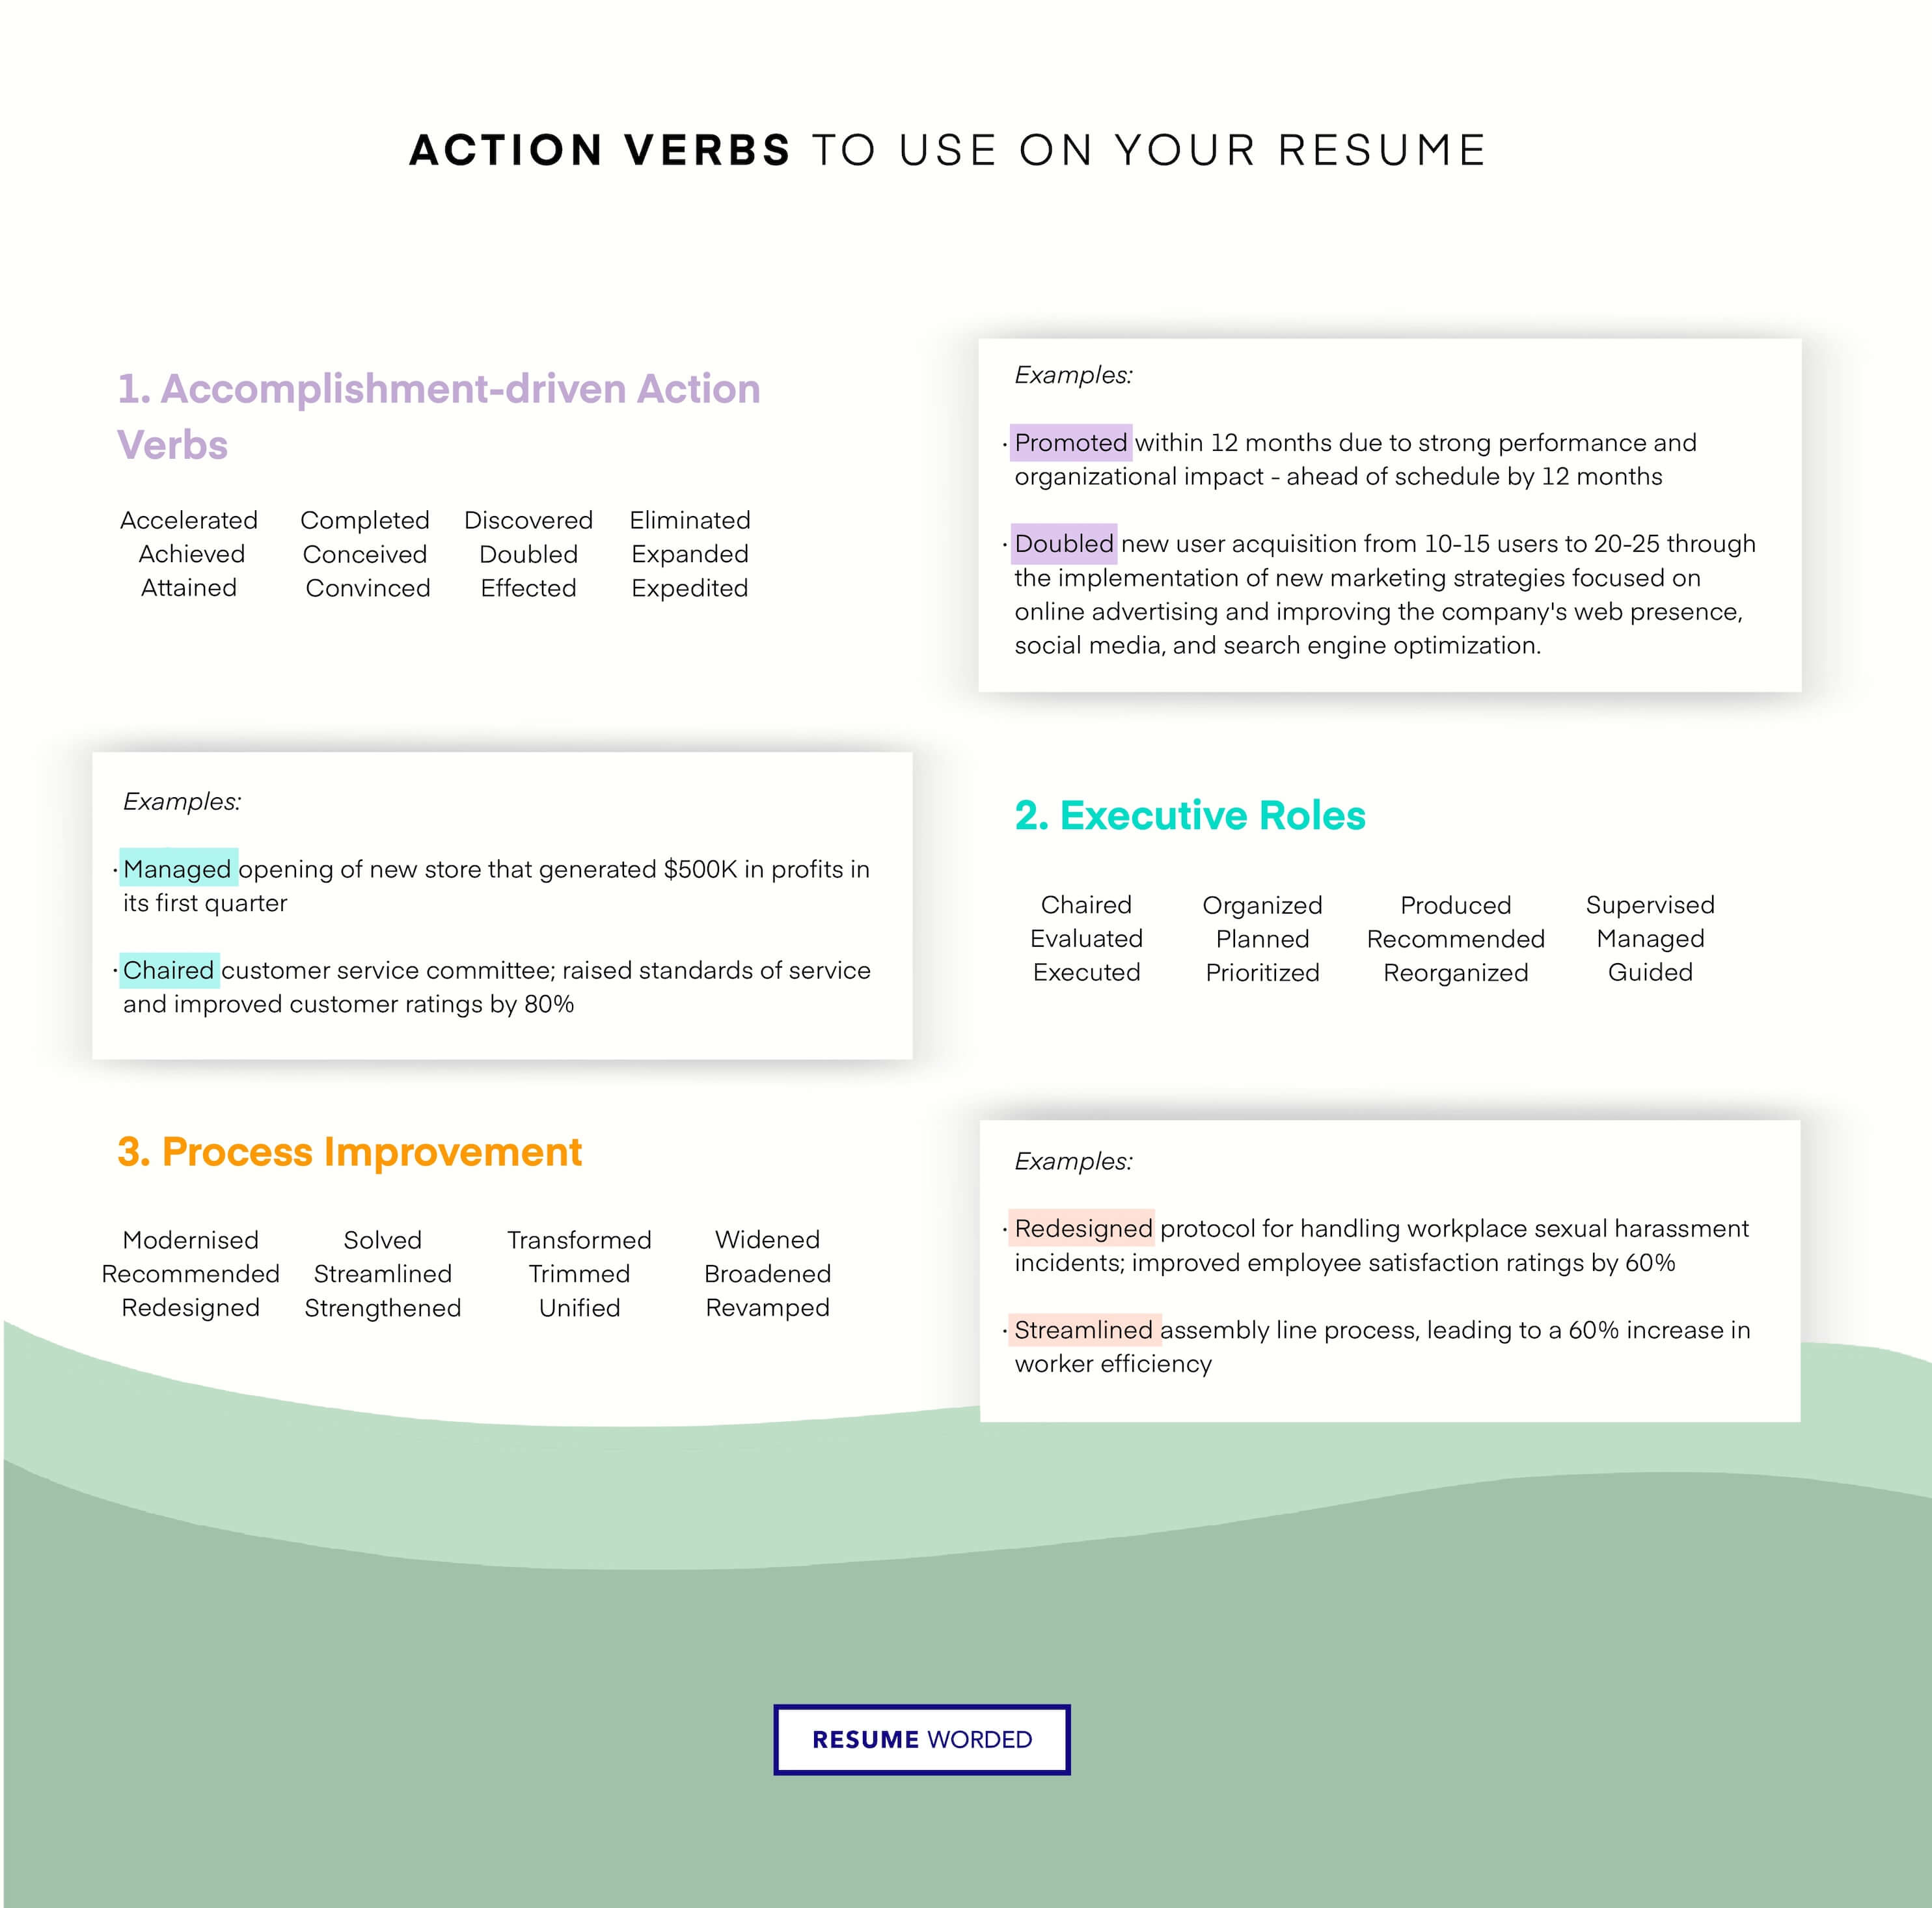 Use bullets with strong action verbs